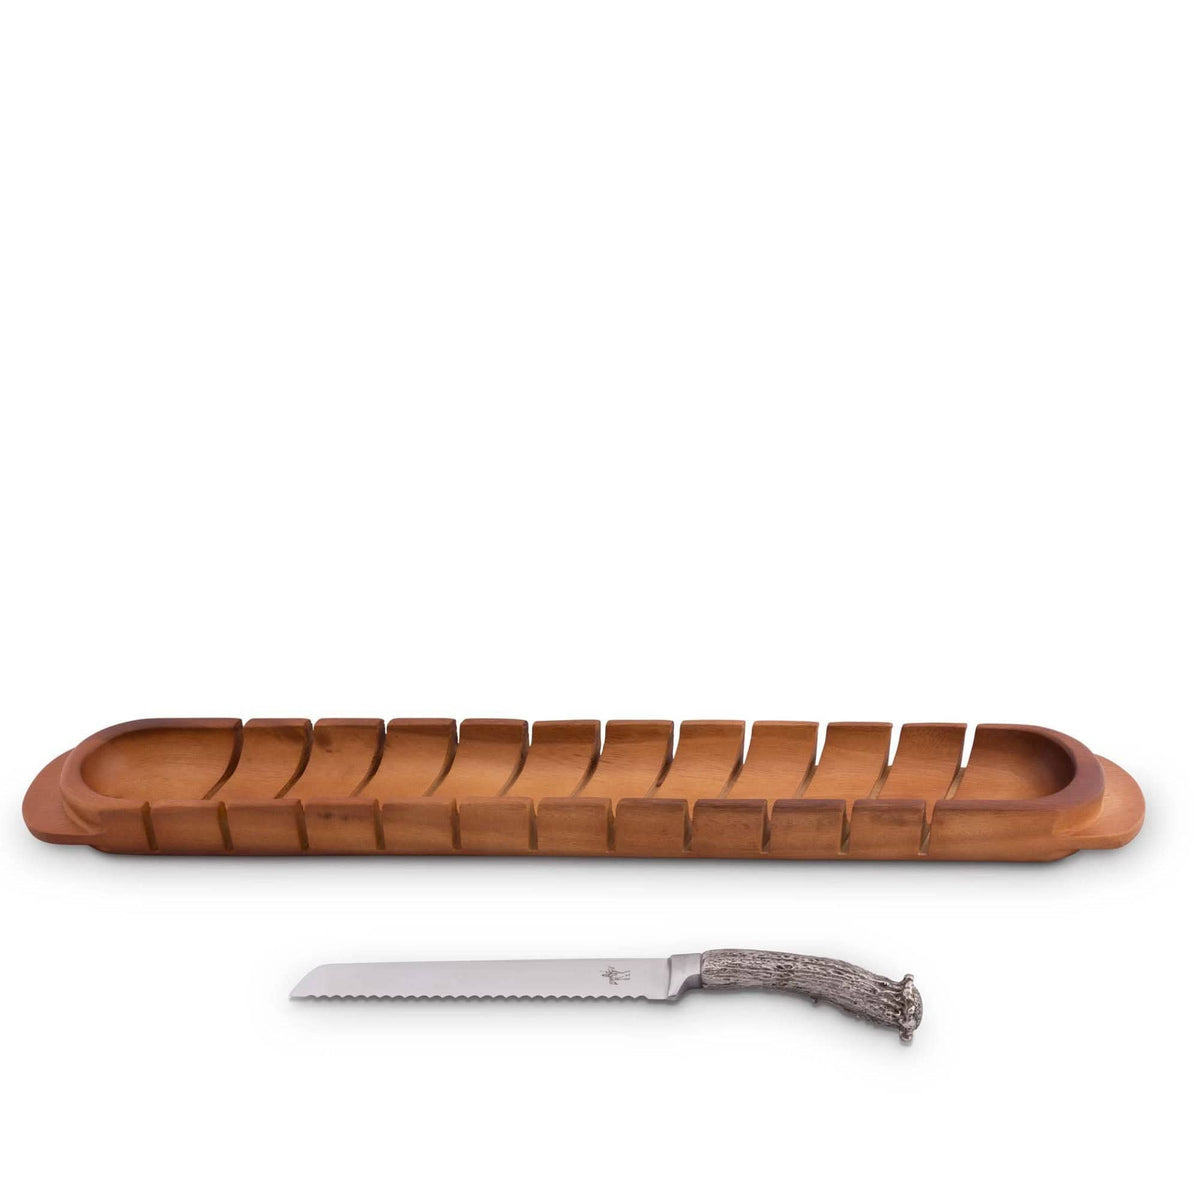 Vagabond House Lodge Style Baguette Board with Antler Bread Knife